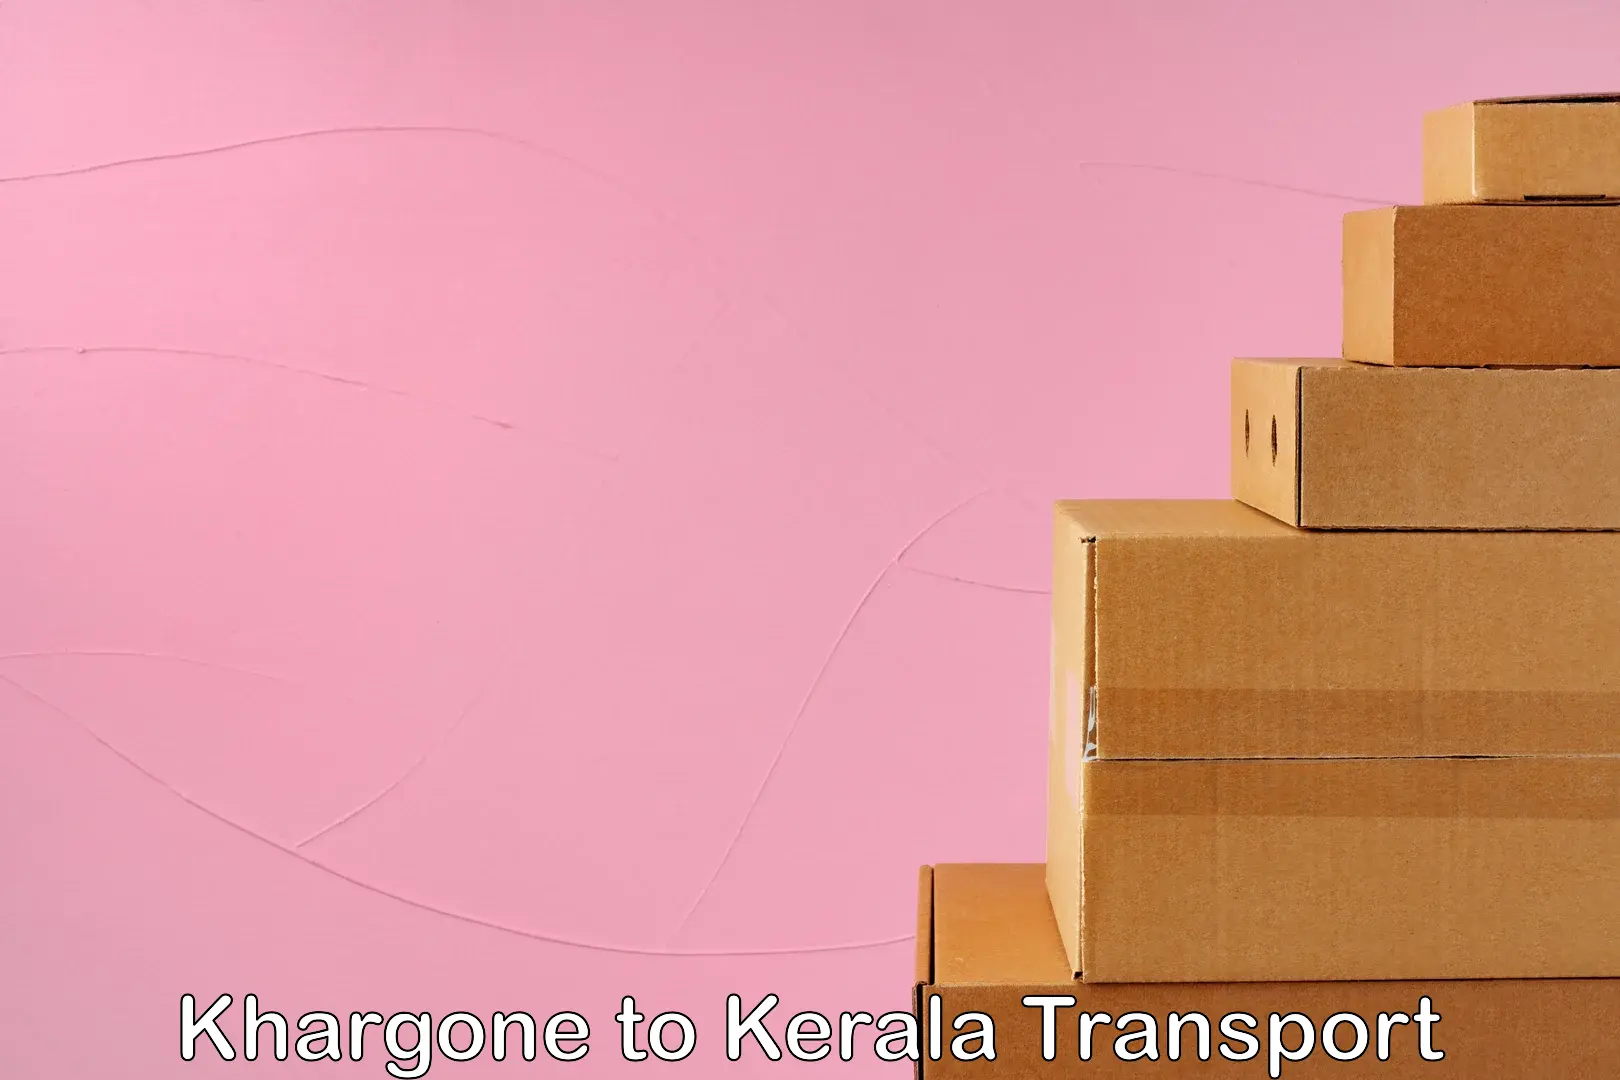 Delivery service Khargone to Kerala